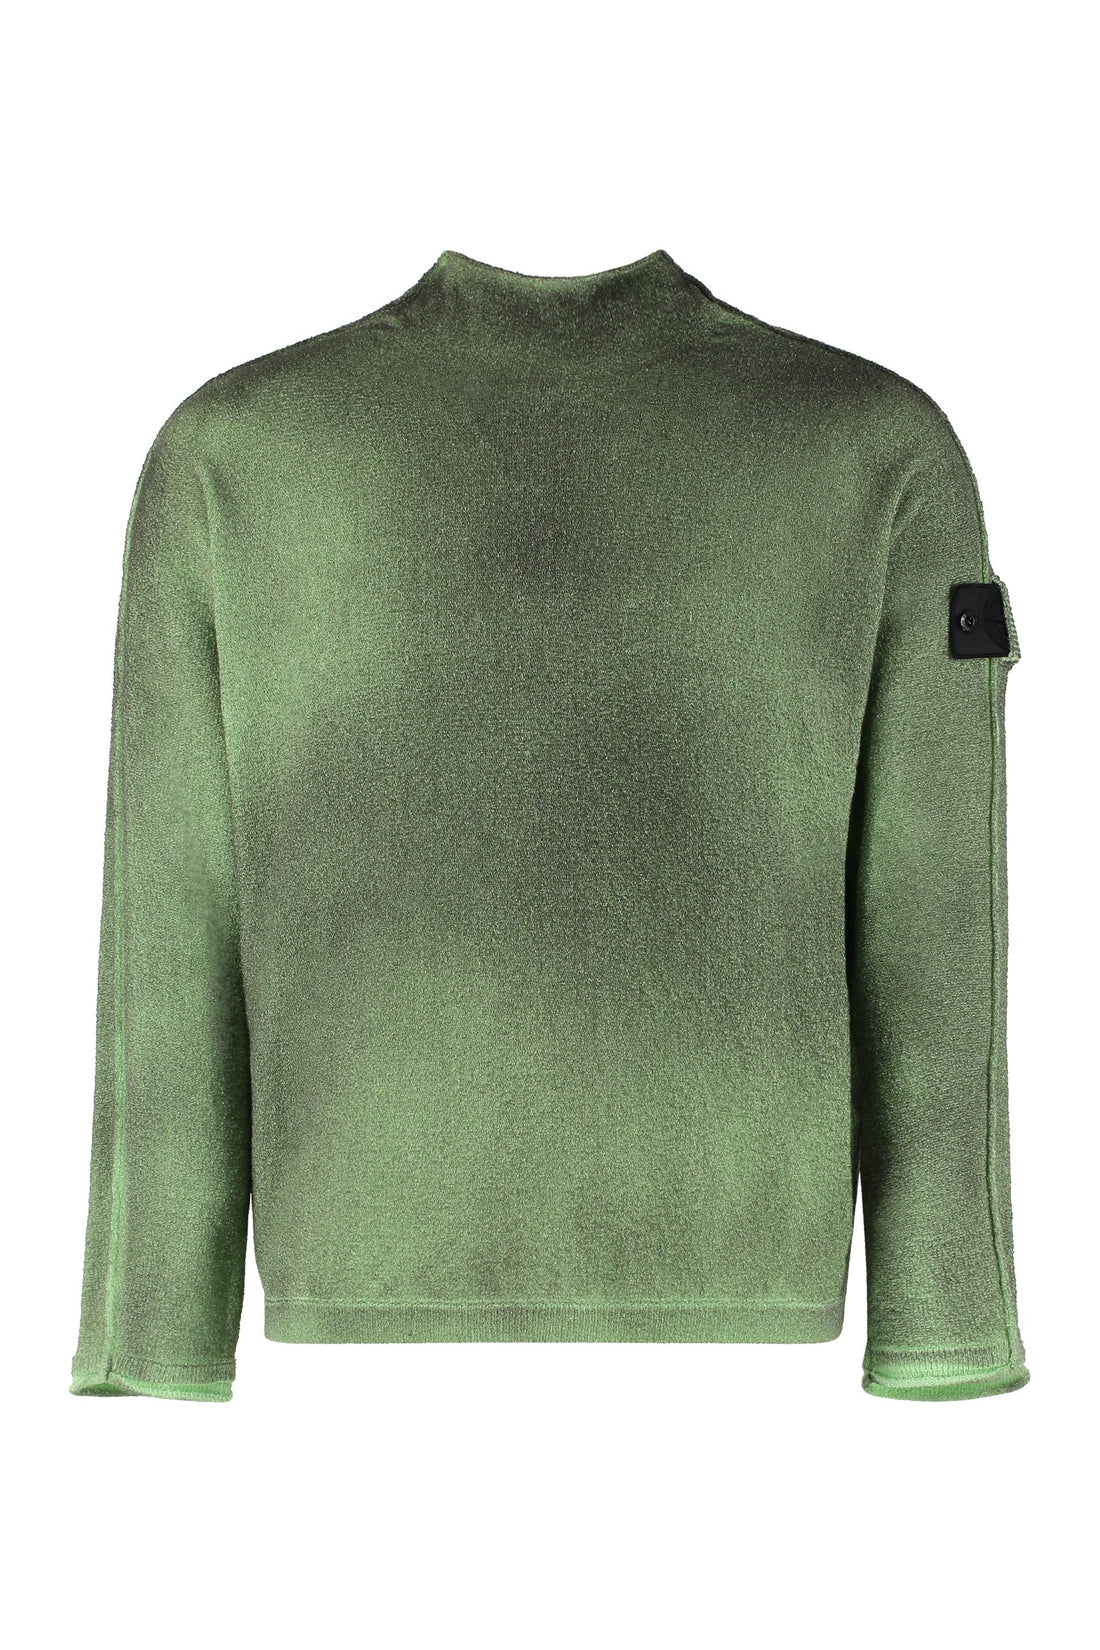 Stone Island Shadow Project-OUTLET-SALE-Cotton-nylon blend sweater-ARCHIVIST